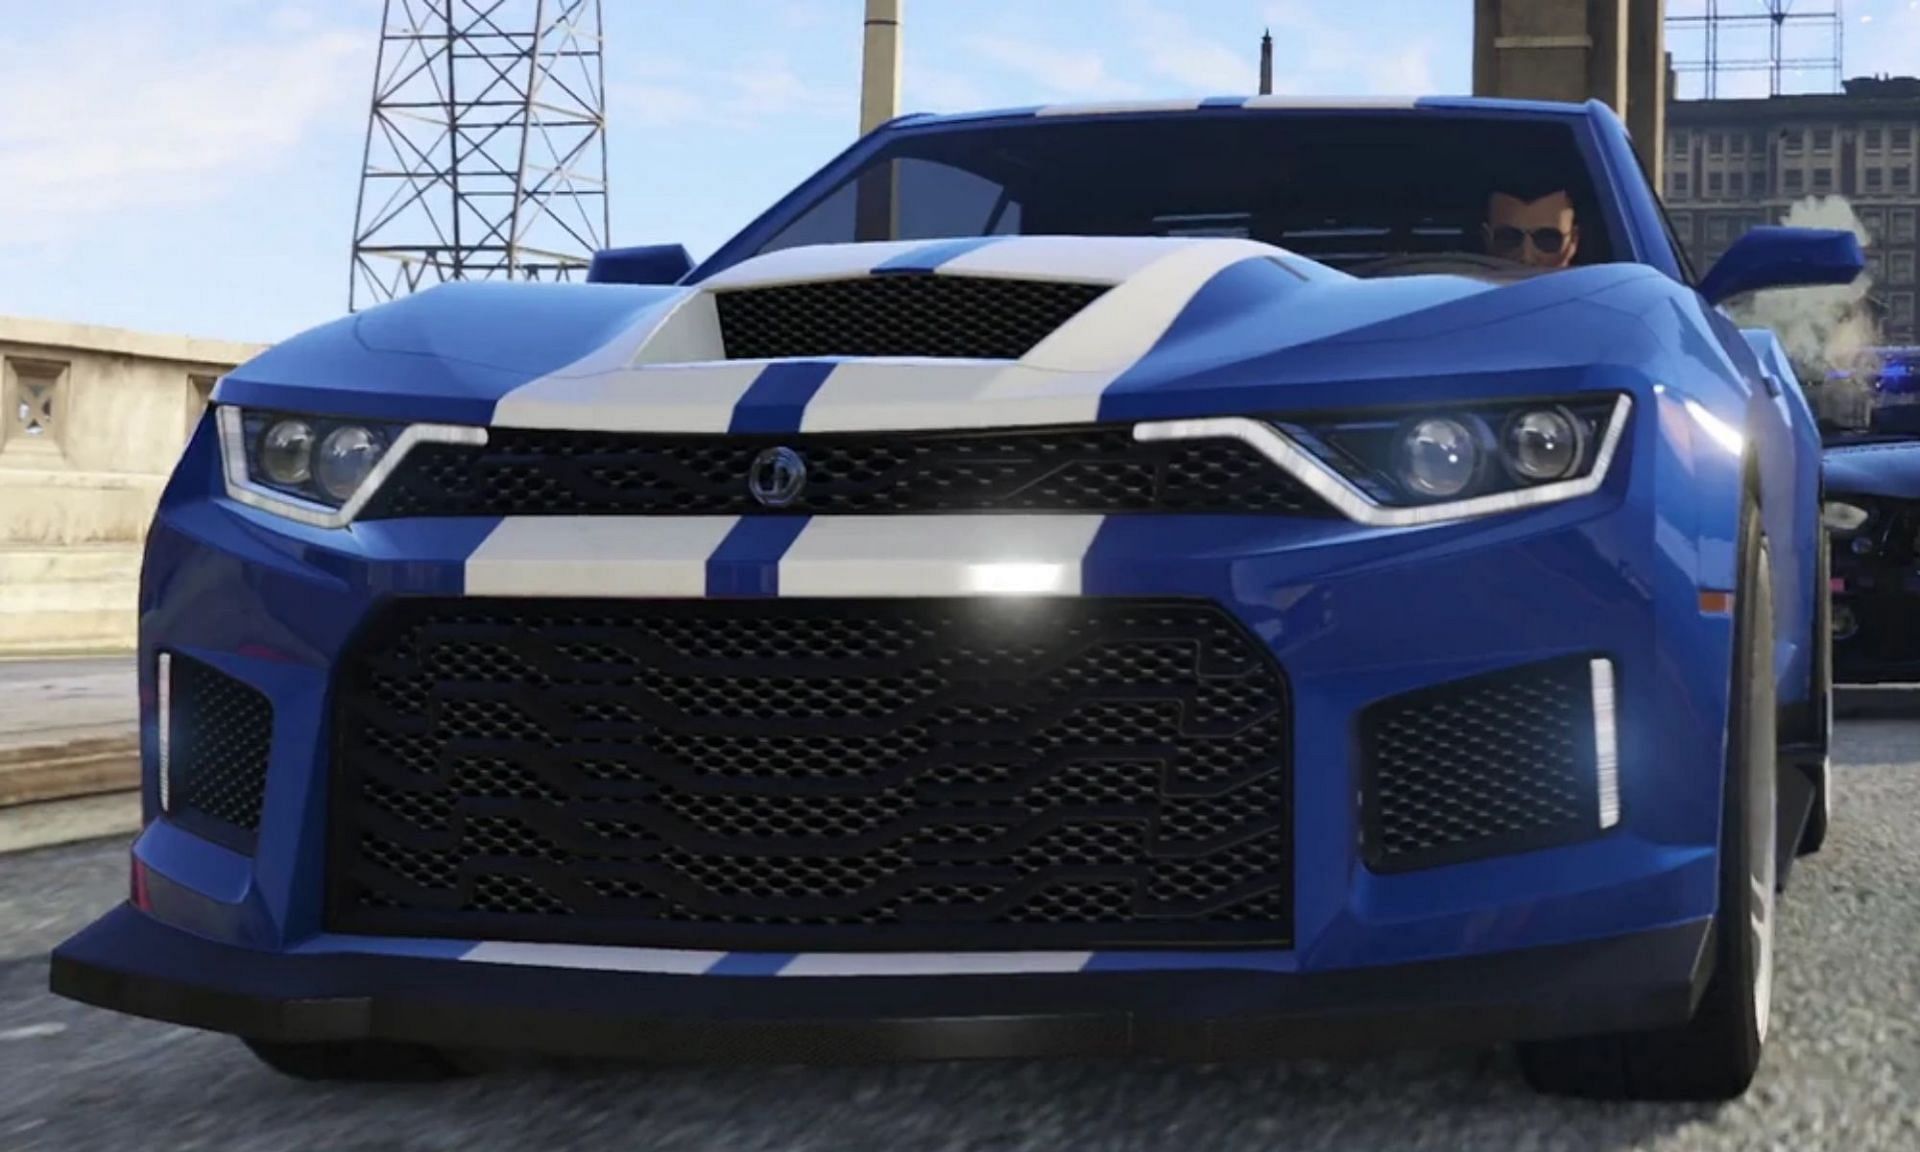 This is a really powerful muscle car by this game